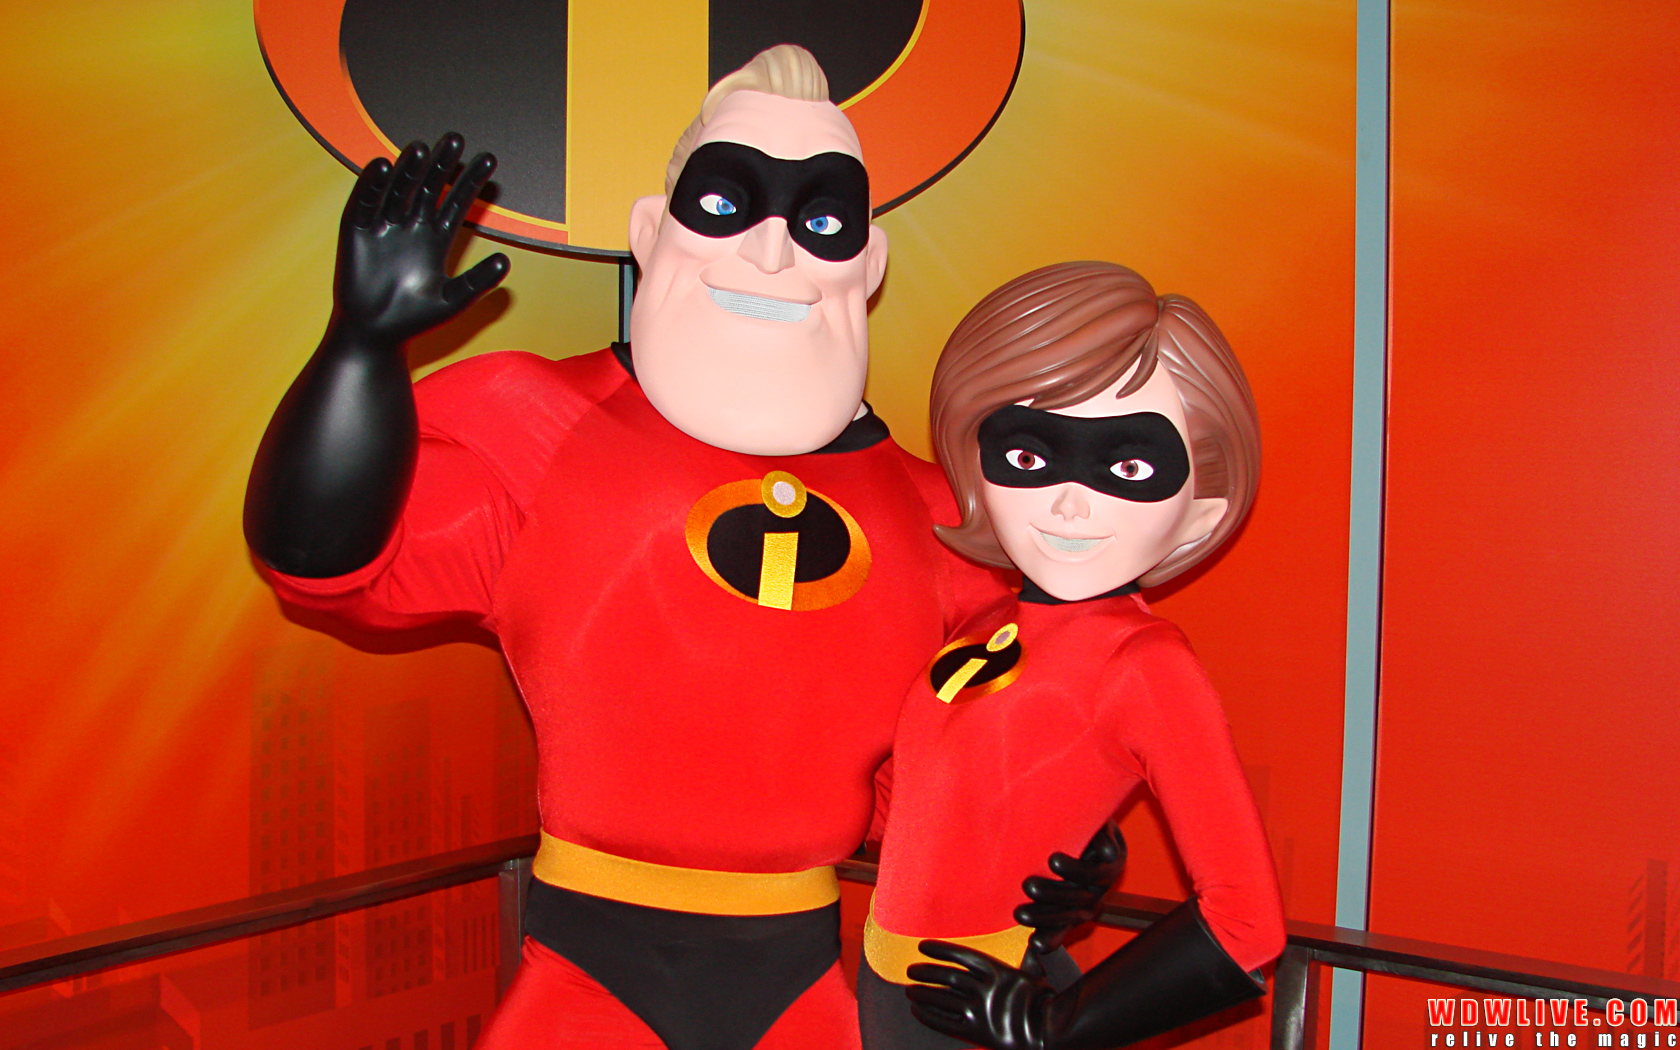 Mr And Mrs Incredible Backgrounds, Compatible - PC, Mobile, Gadgets| 1680x1050 px